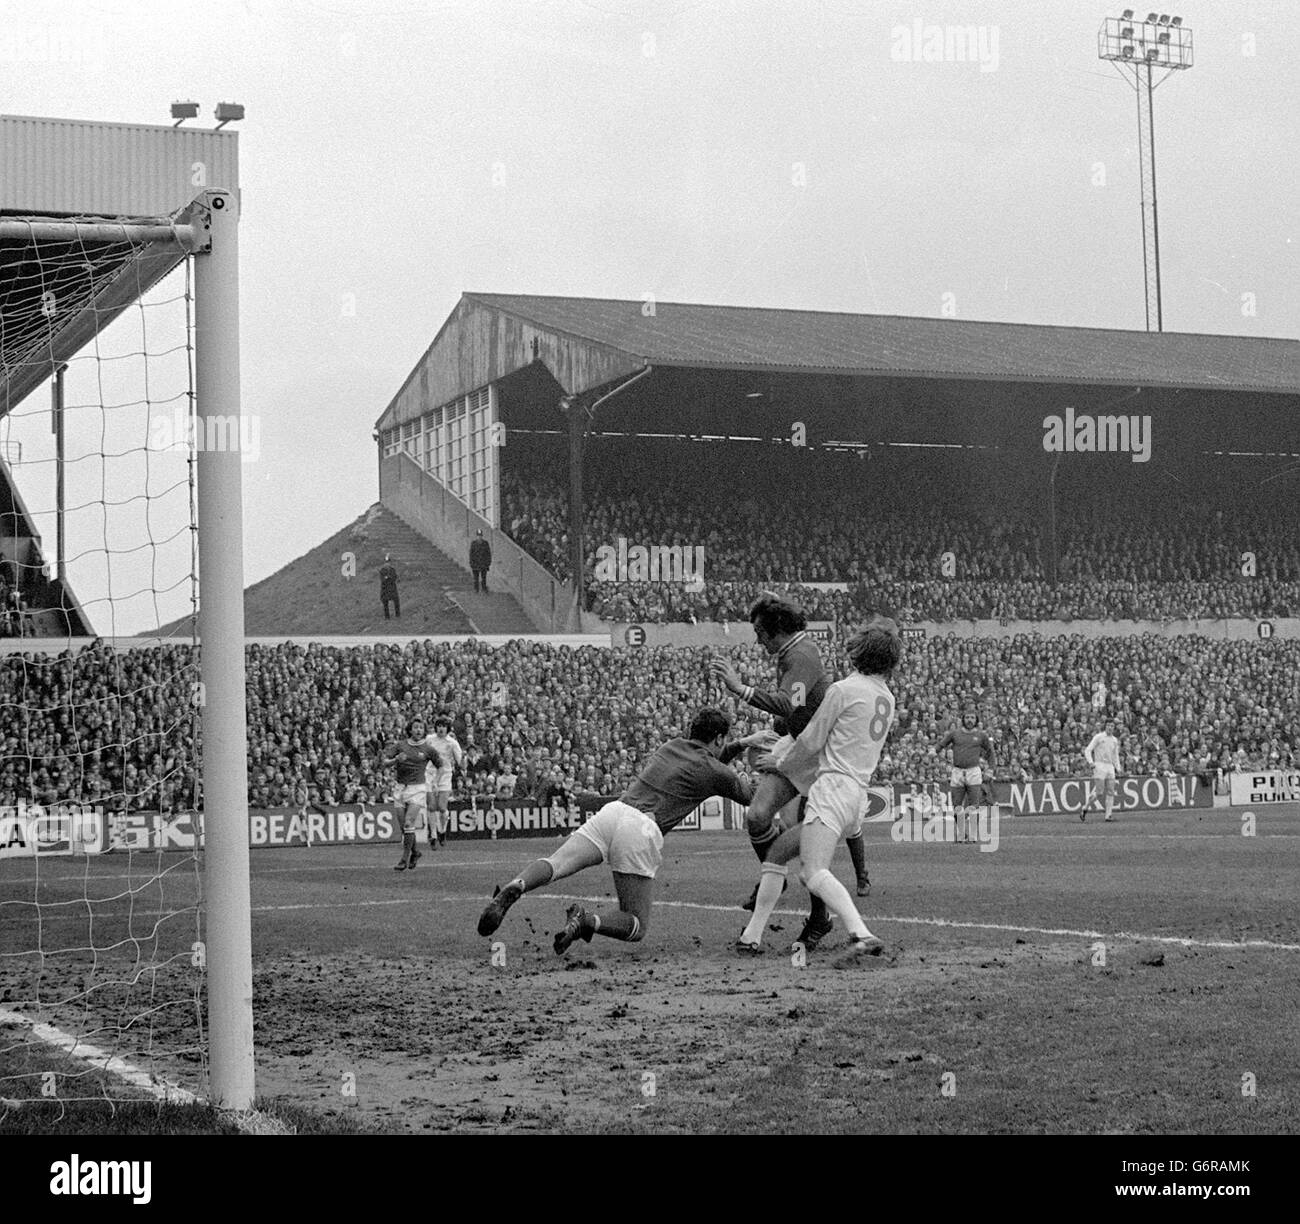 Bristol City goalkeeper Raymond Cashley saves from Leeds Utd's Allan Clarke (No8) assisted by Gerald Sweeney, during the FA Cup 5th round replay at Elland Road, Leeds. Stock Photo